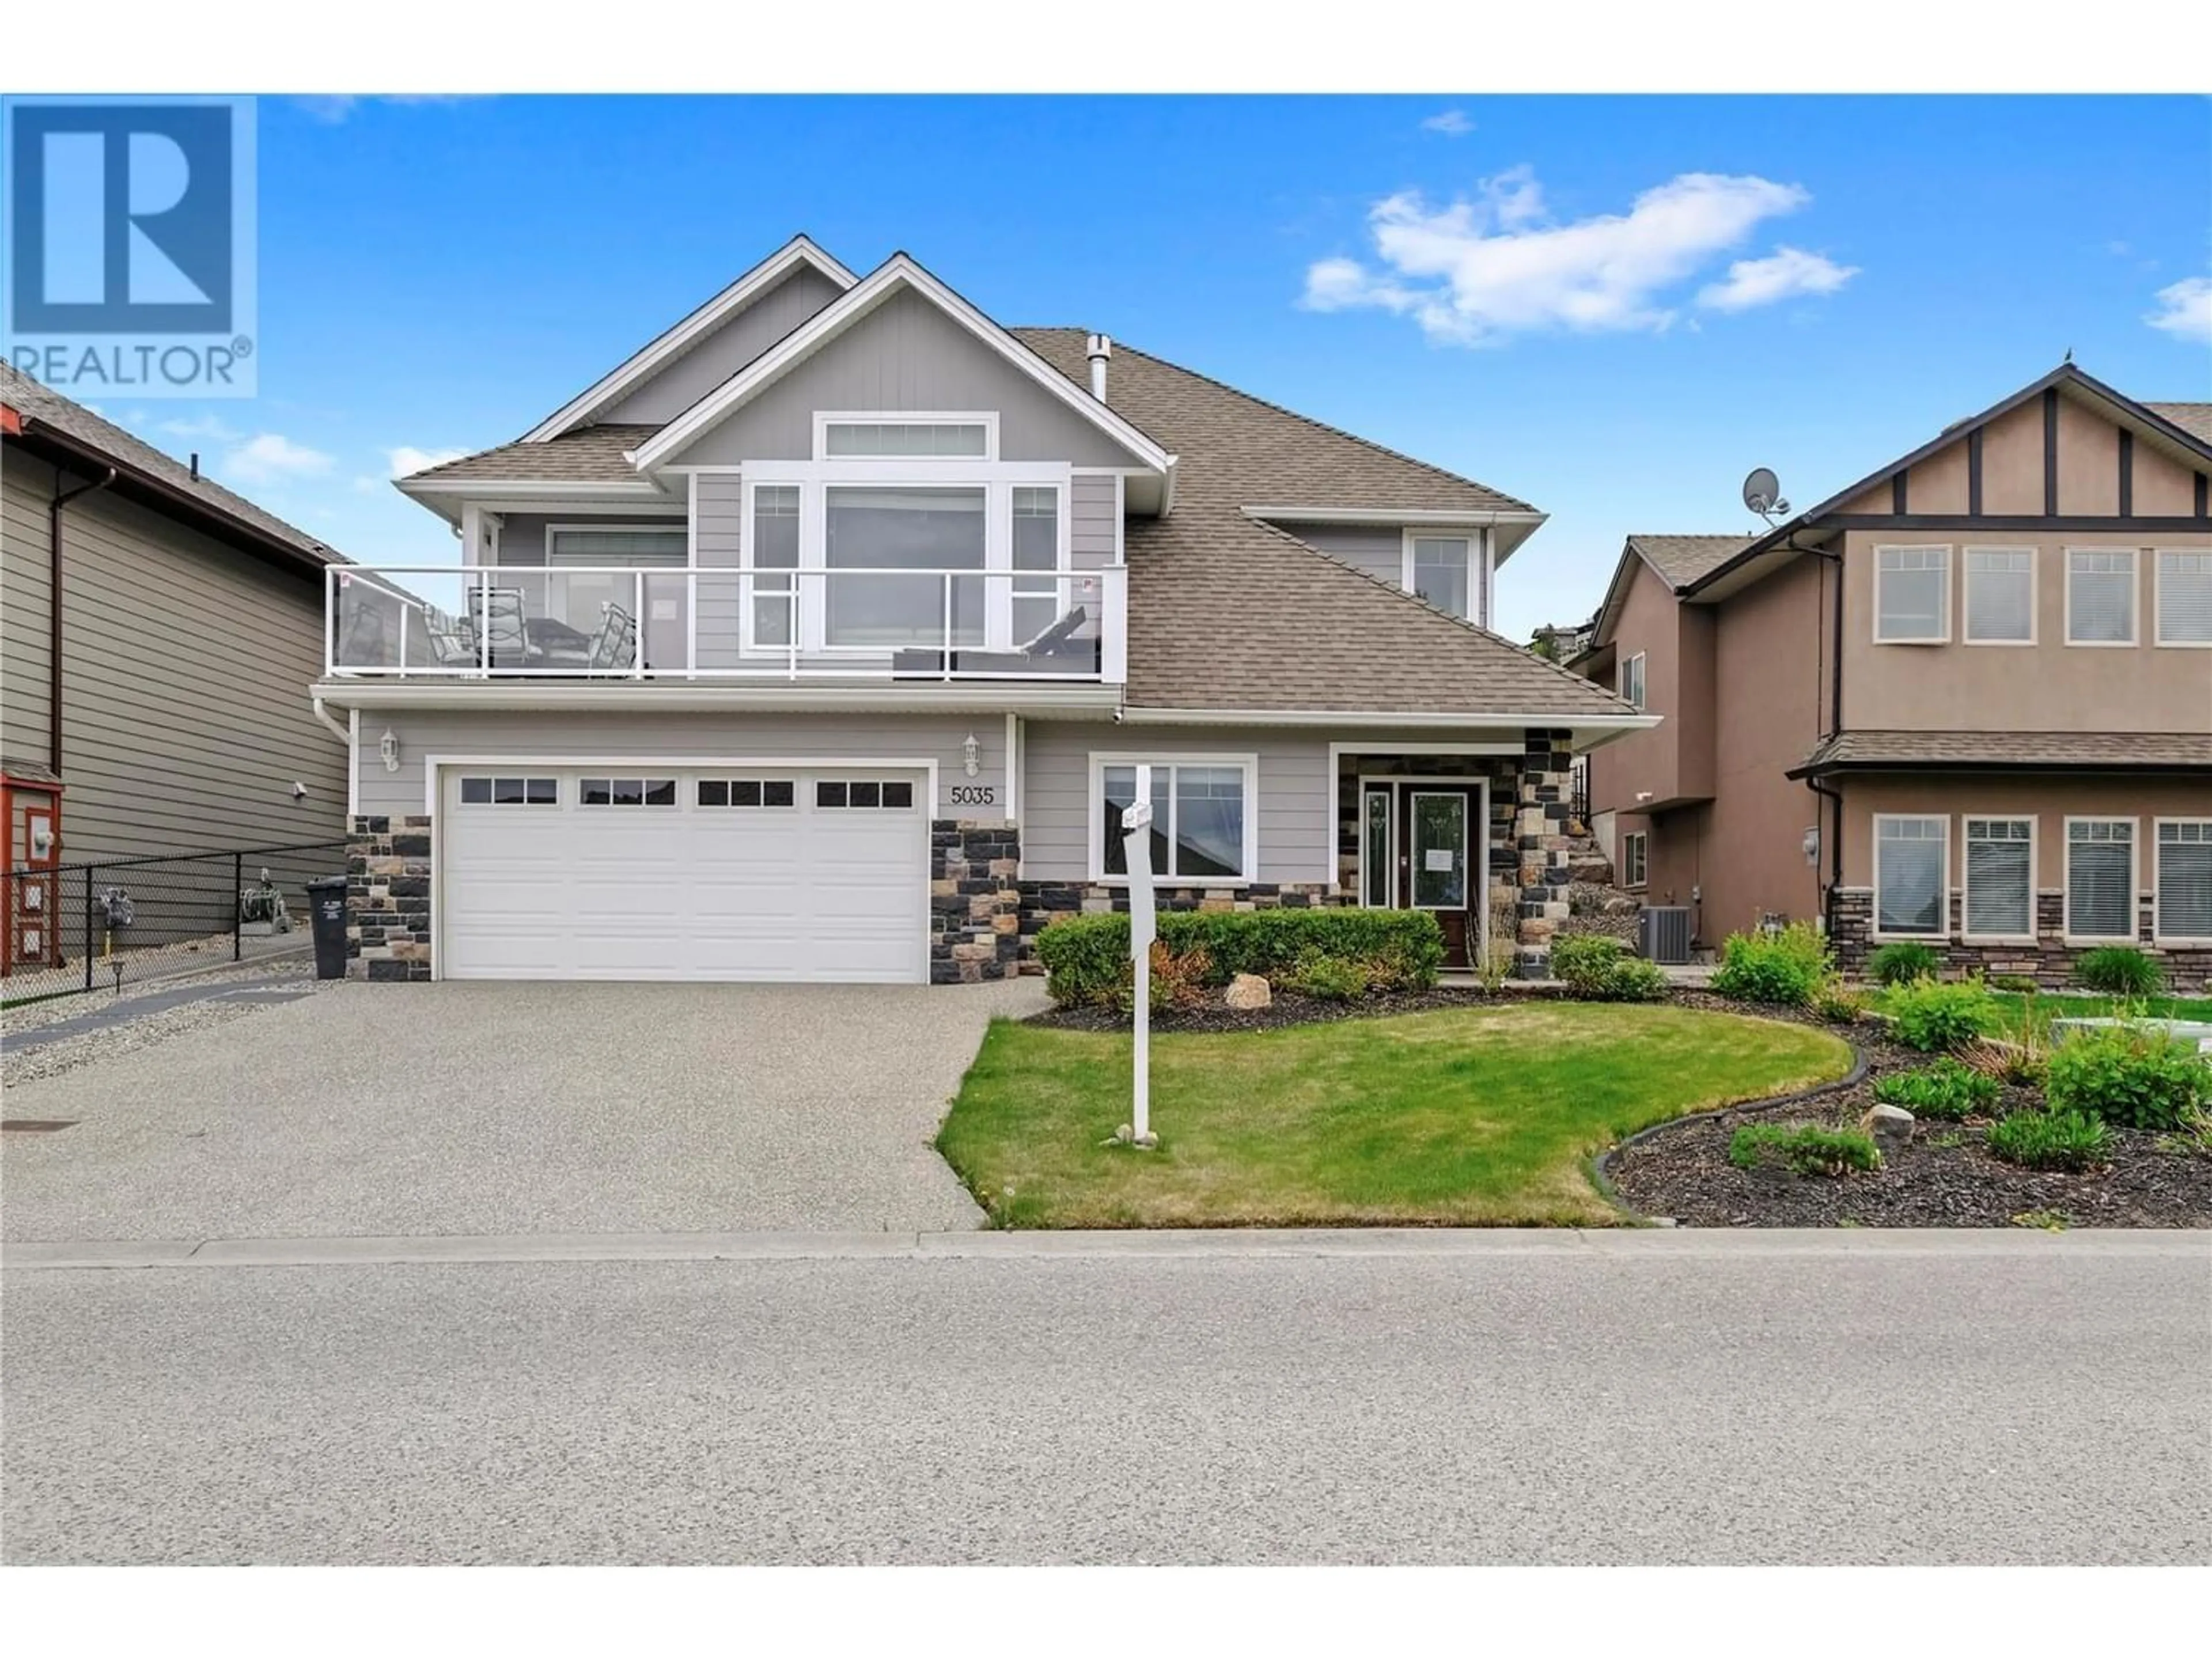 Frontside or backside of a home for 5035 SEON Crescent, Kelowna British Columbia V1W4M4